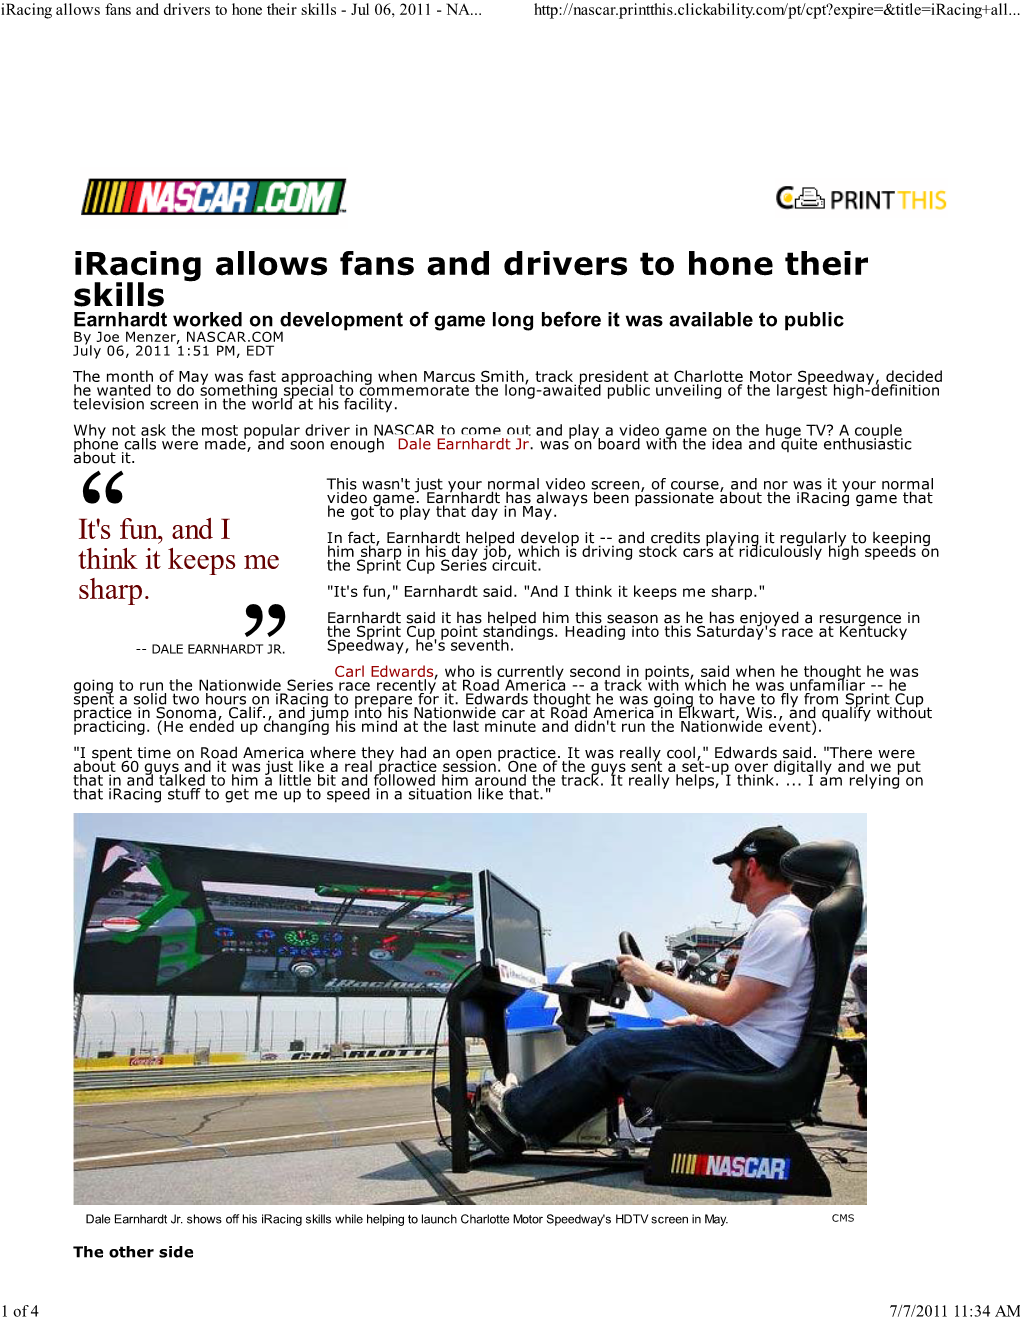 Iracing Allows Fans and Drivers to Hone Their Skills - Jul 06, 2011 - NA